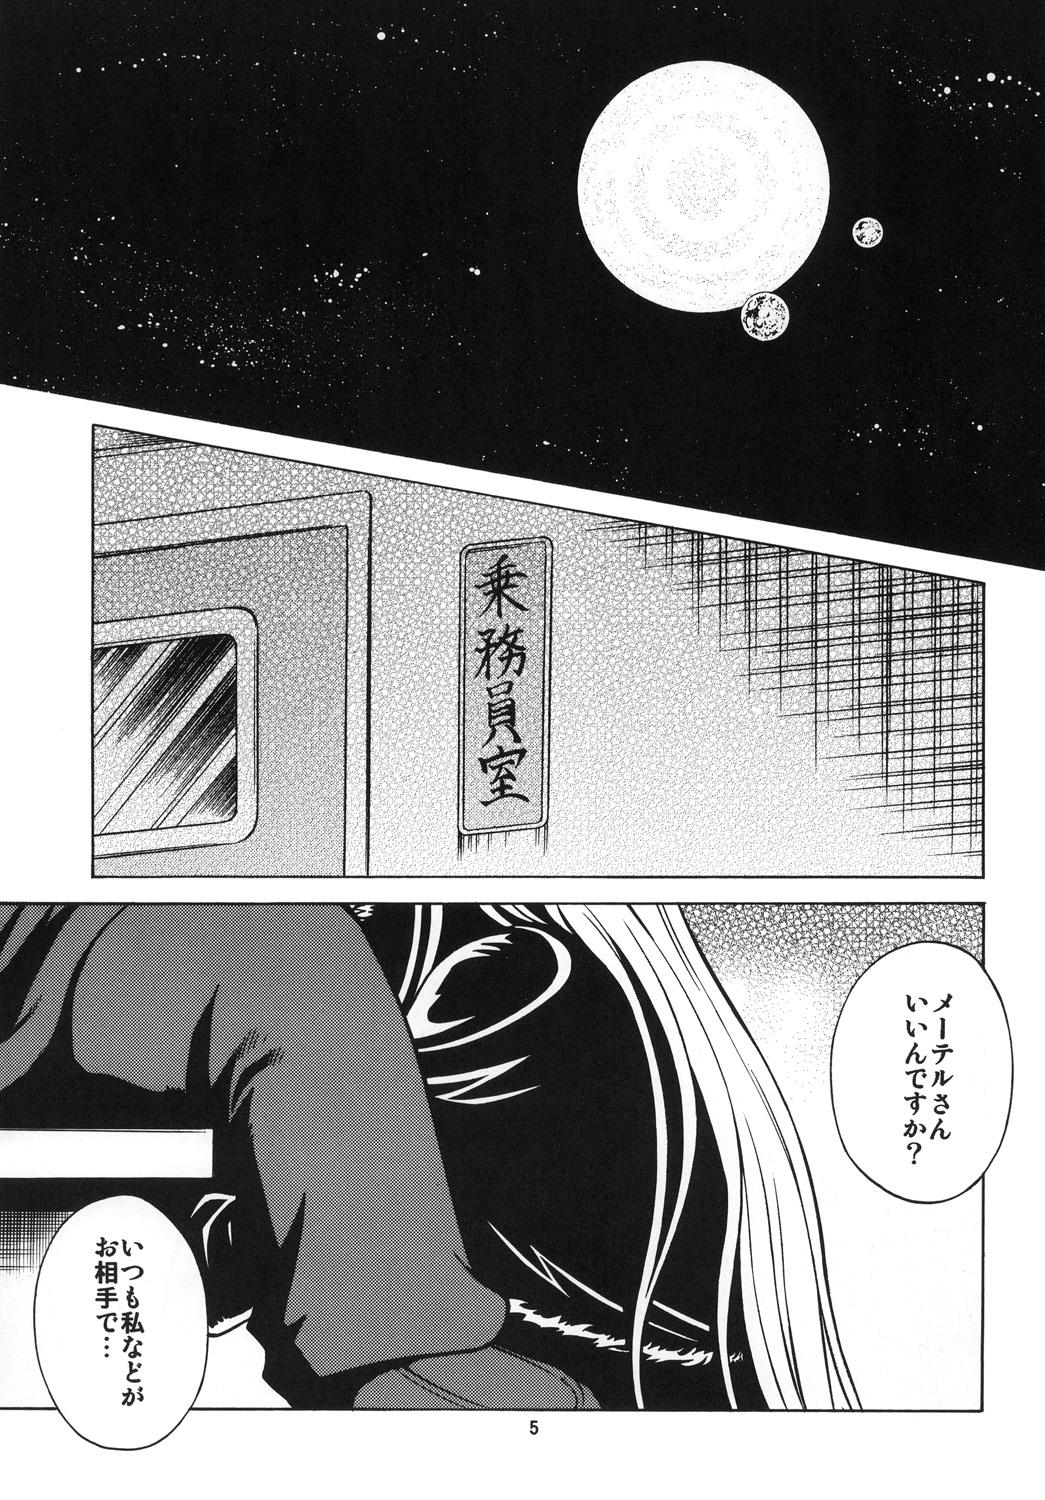 Fuck Porn NIGHTHEAD＋ - Galaxy express 999 Space pirate captain harlock Story - Page 4